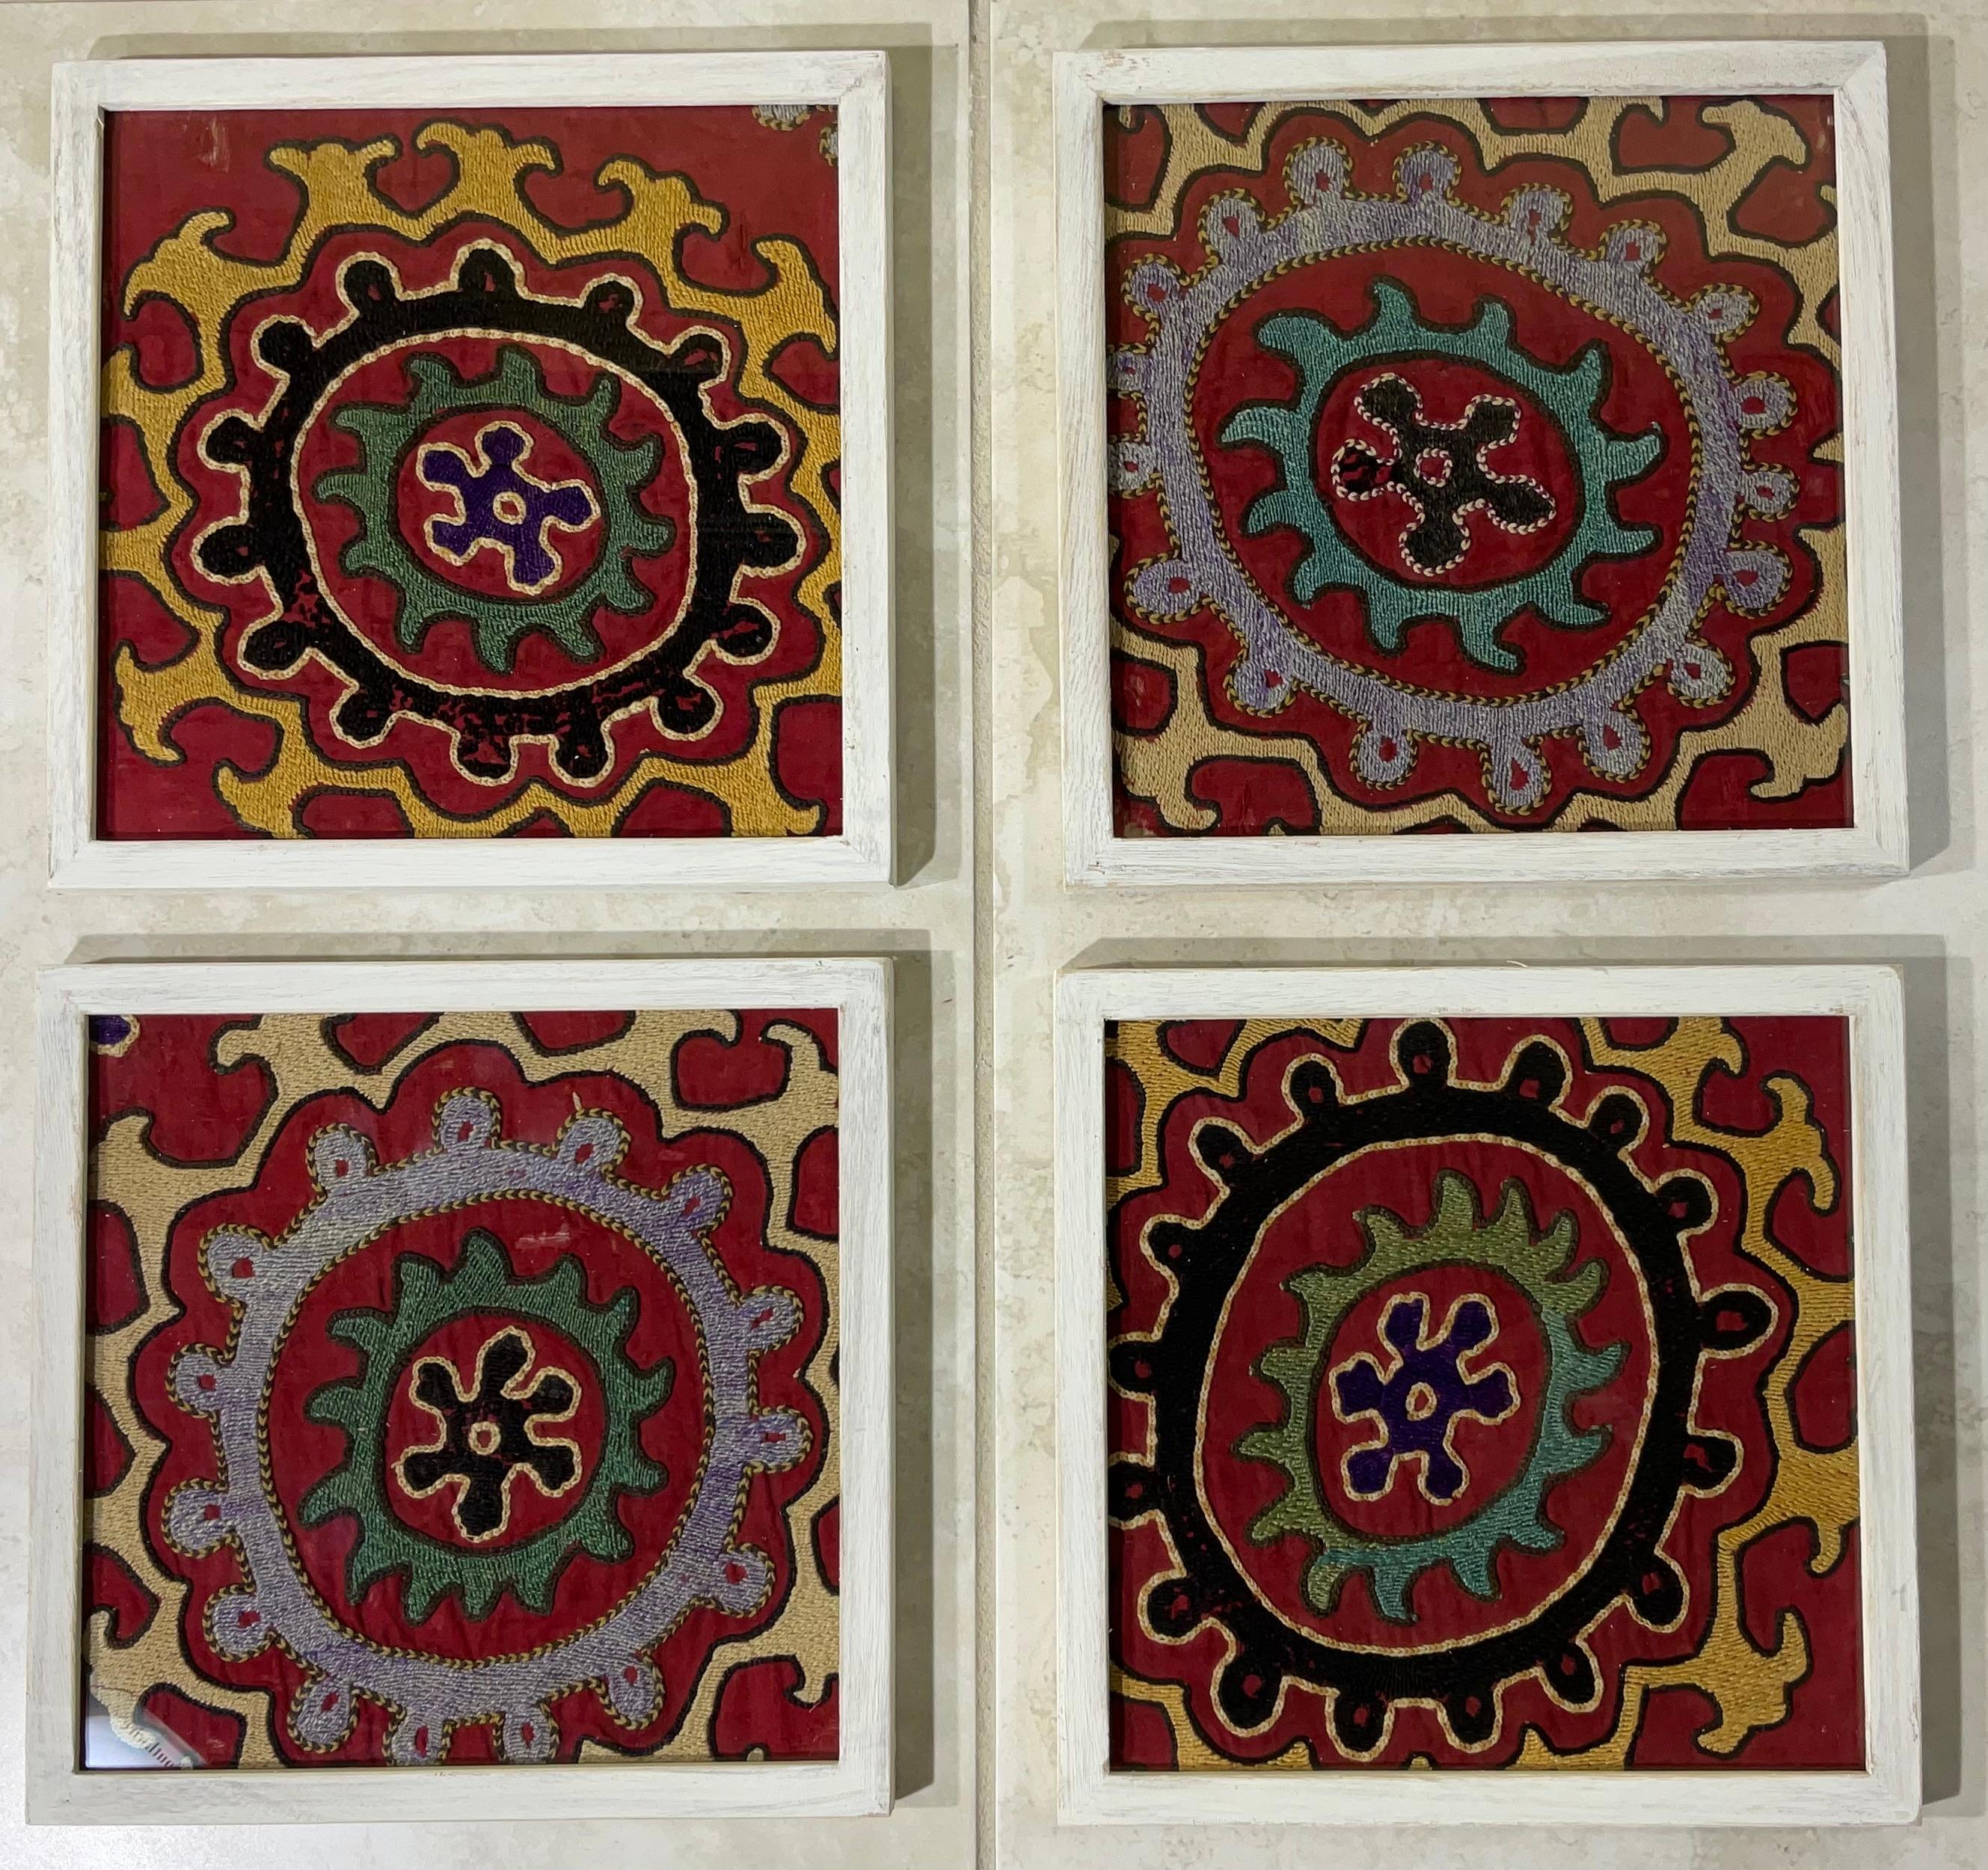 Exceptional antique hand embroidery fragments of Suzani textile, with circle of life round motif , professionally mounted on four hand painted wood shadow boxes to make beautiful versatile objects of art for wall hanging.
Even though these hand made